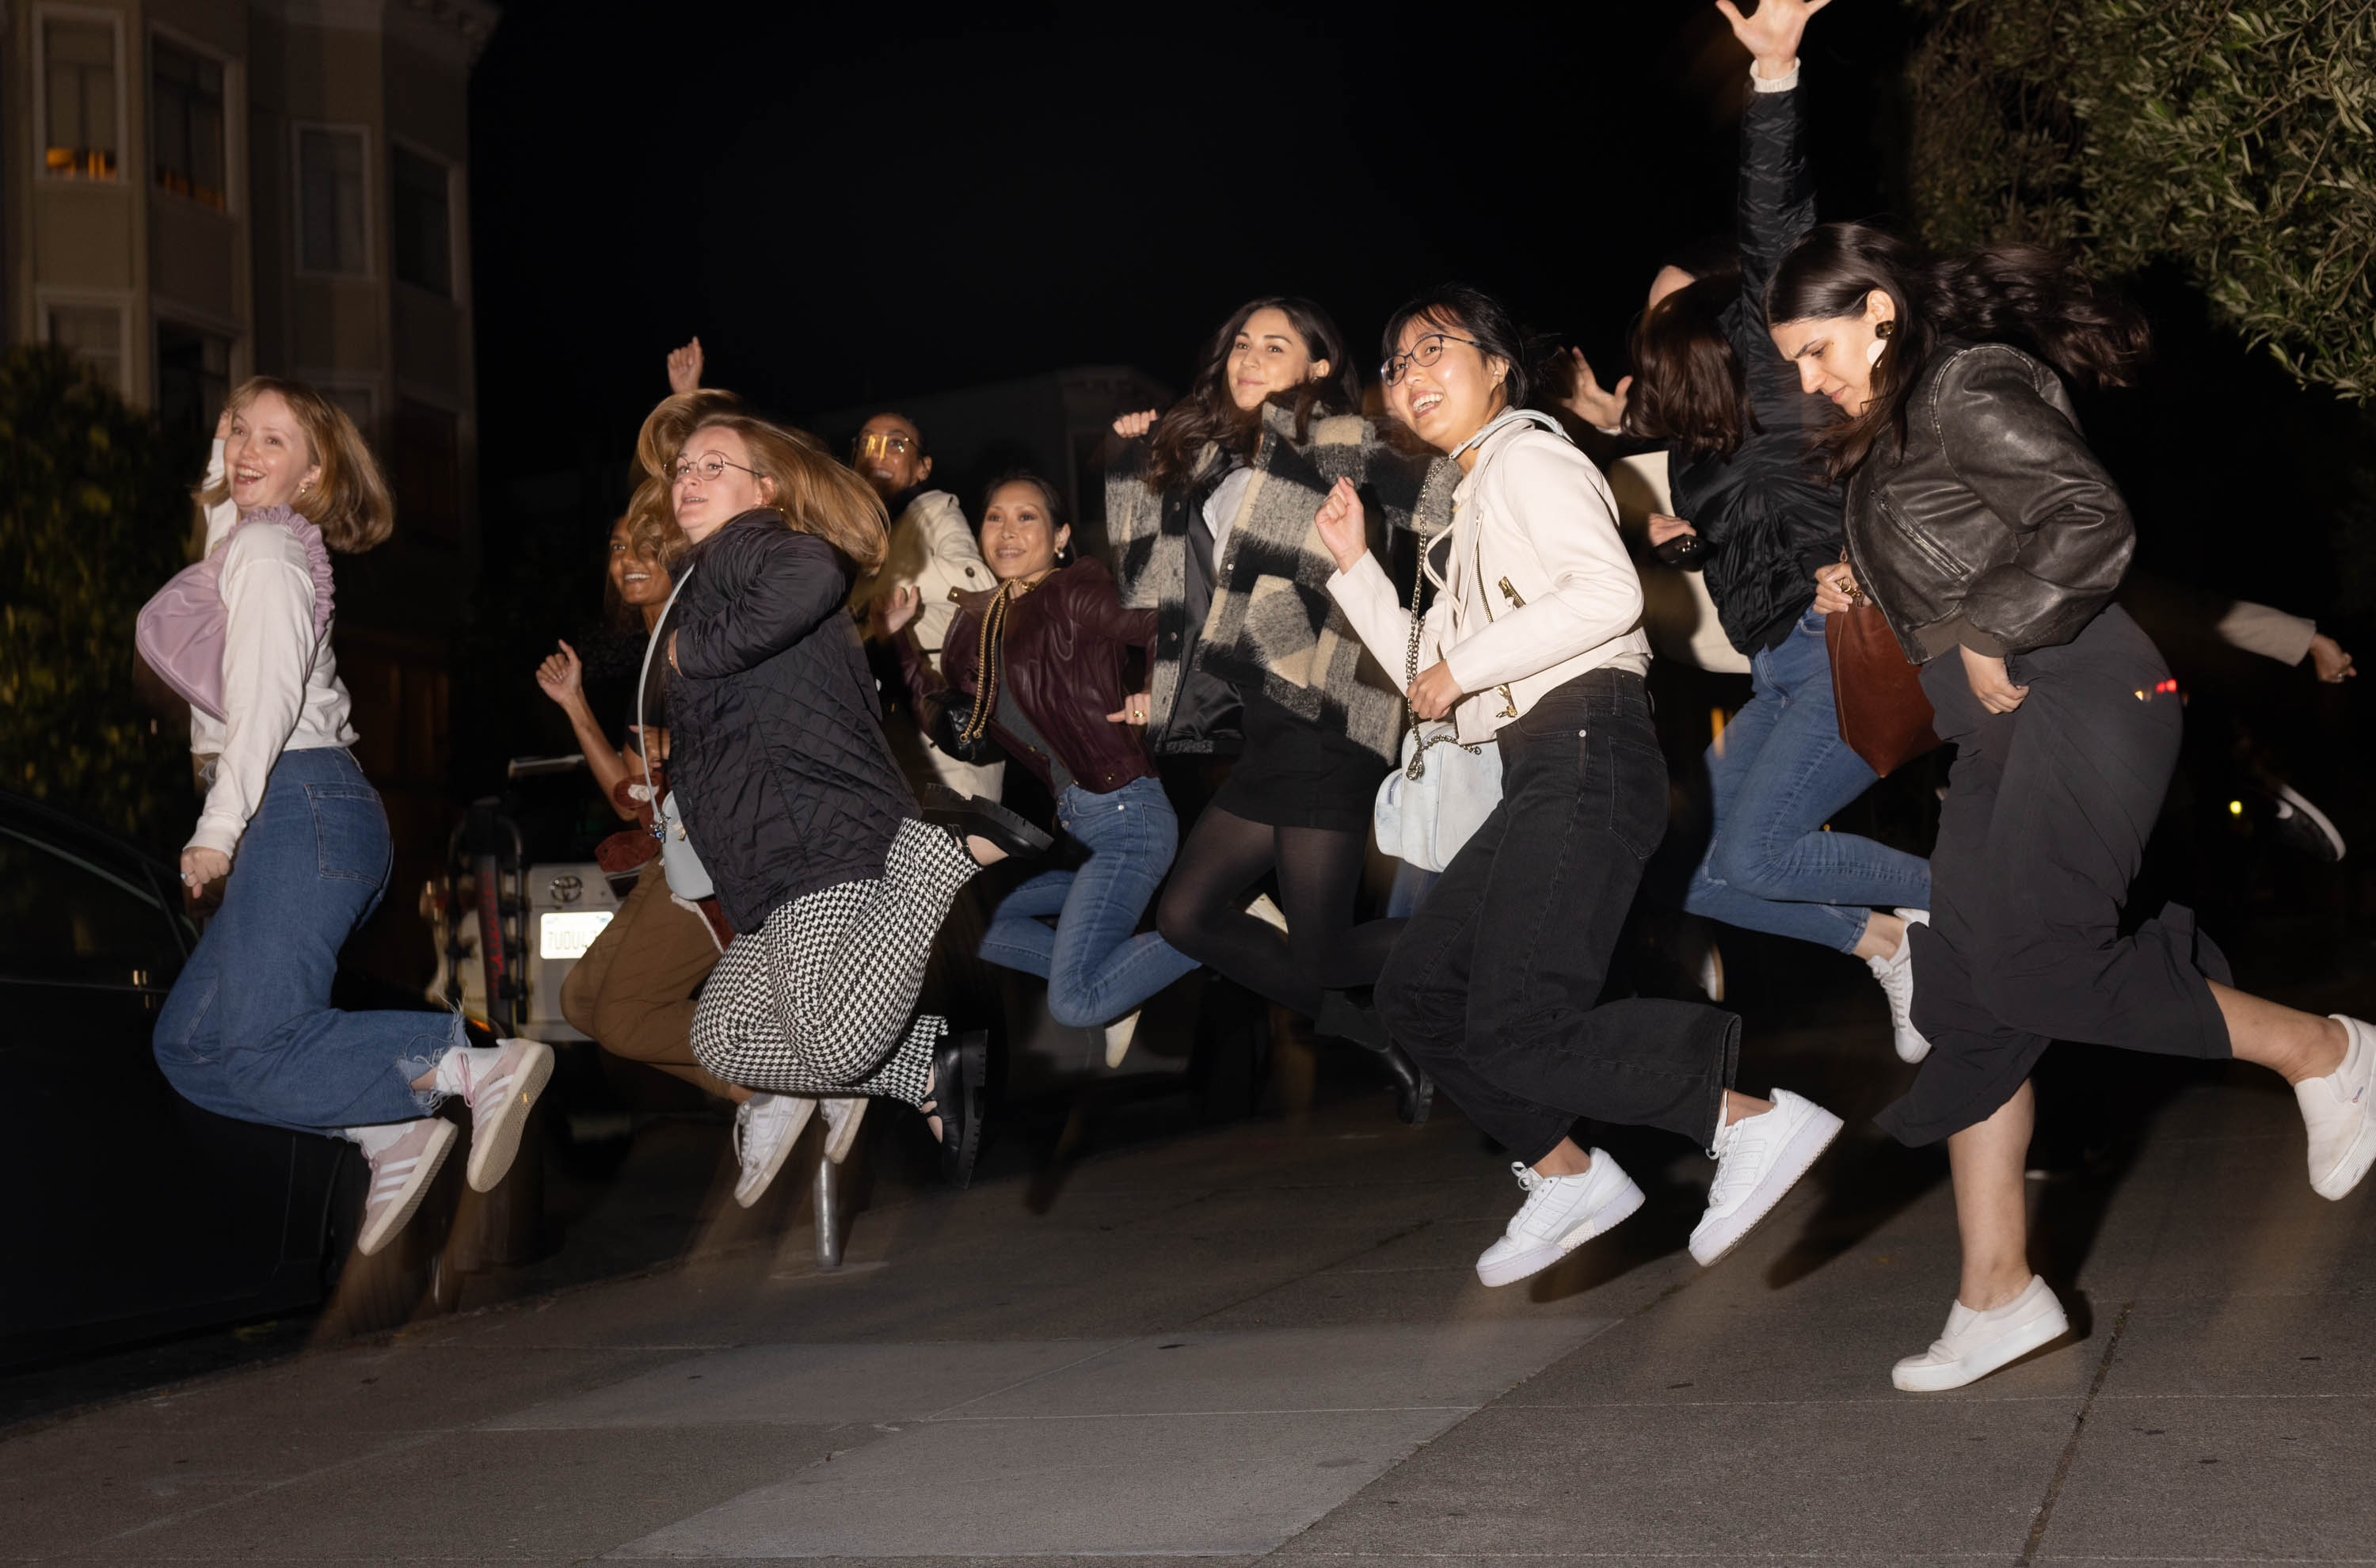 About one dozen young women jump in the air simultaneously while standing on the sidewalk at night.